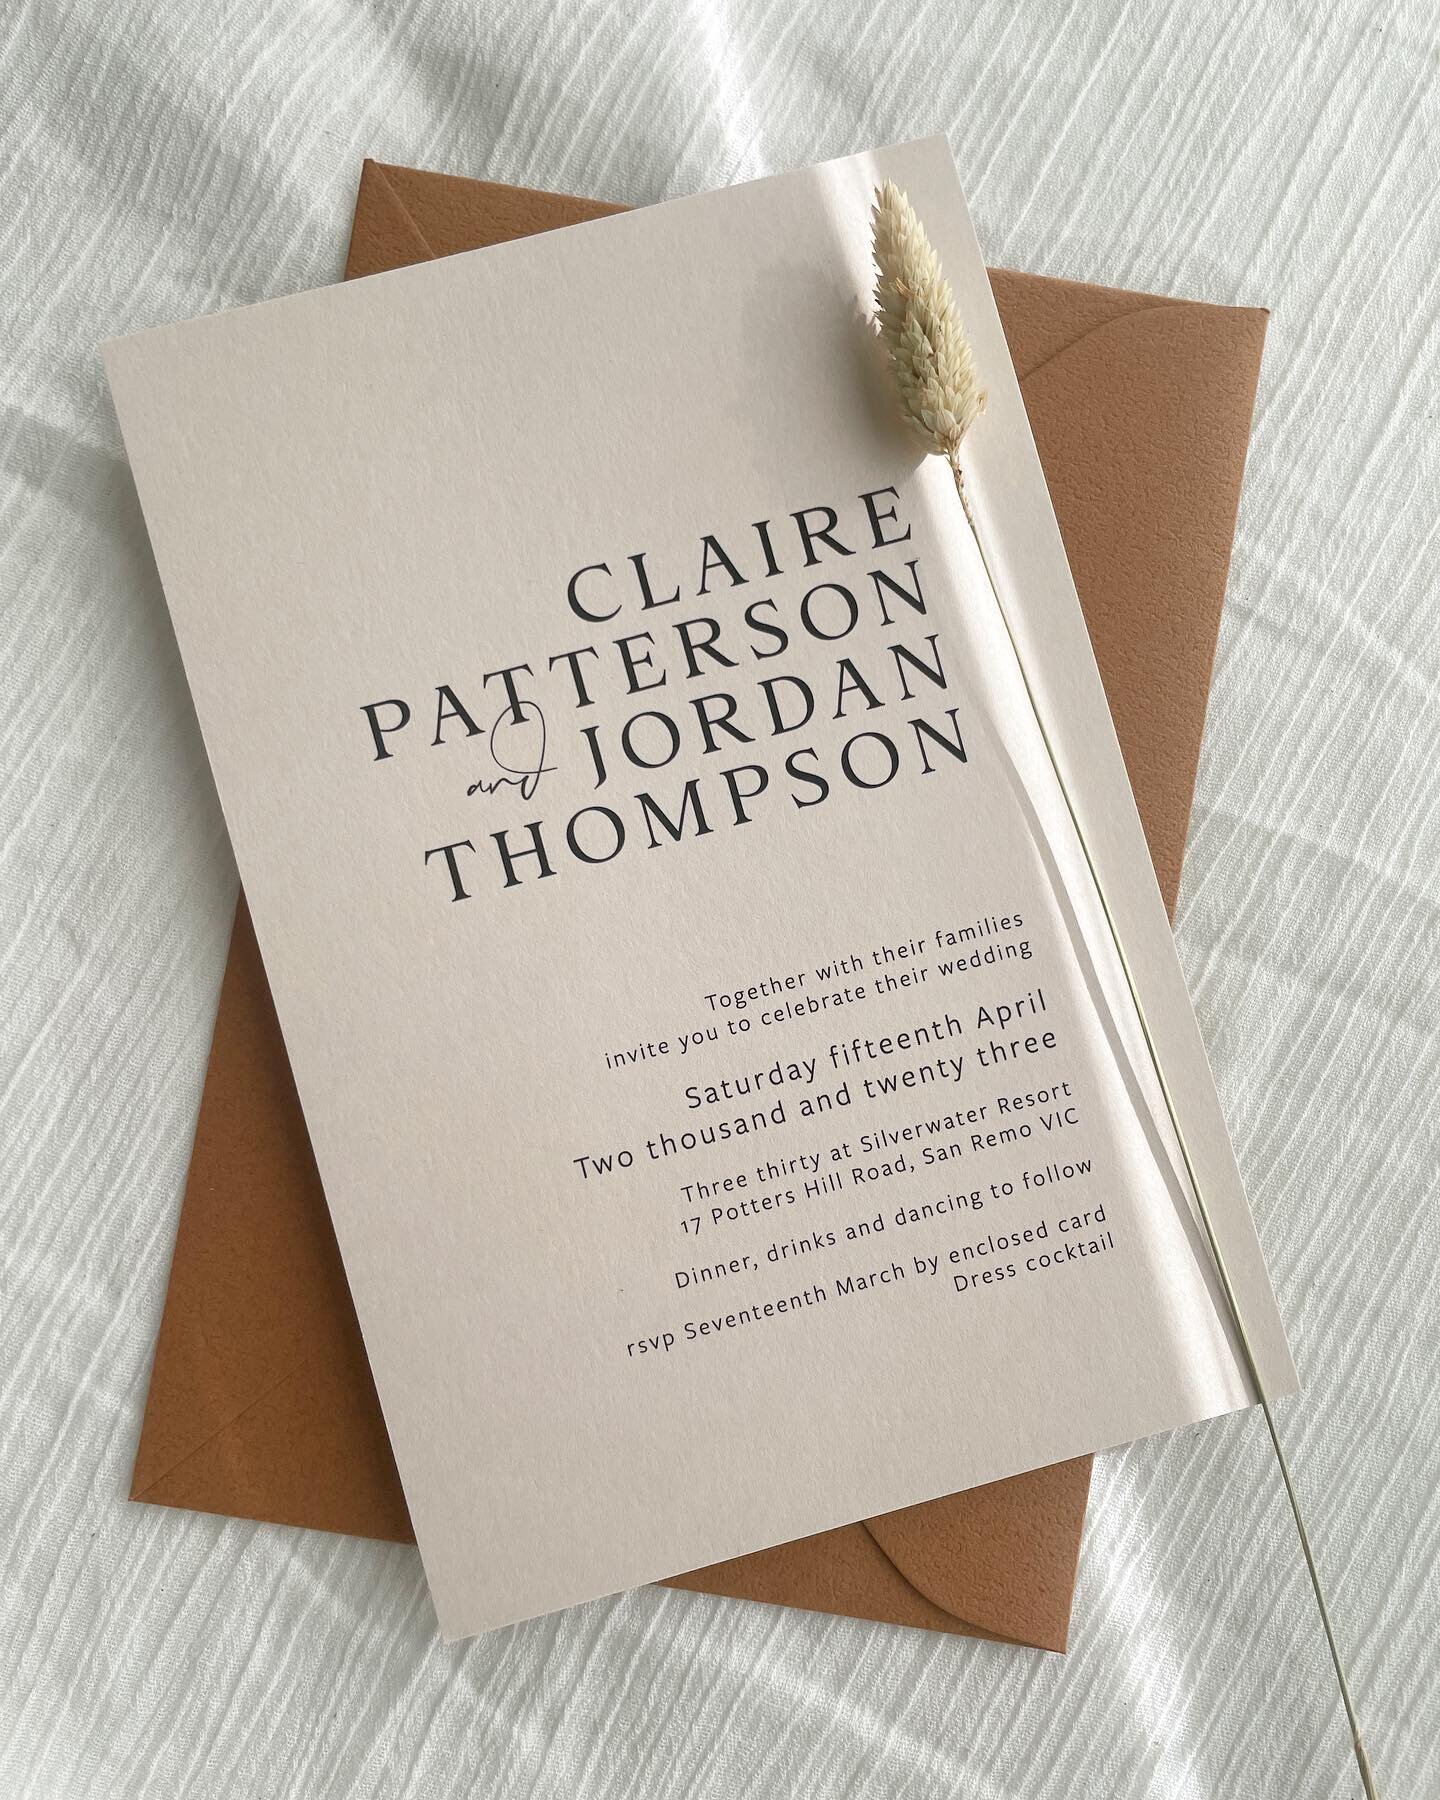 Traditional with a modern flair.
Our Barcelona invitation for C + J
Almond card with cinnamon envelope.
.
.
.
.
.
.
#weddinginvitation #invitations #weddinginvite #weddinginspo #weddinginspiration #invite #invitation #weddingstationery #stationery #i